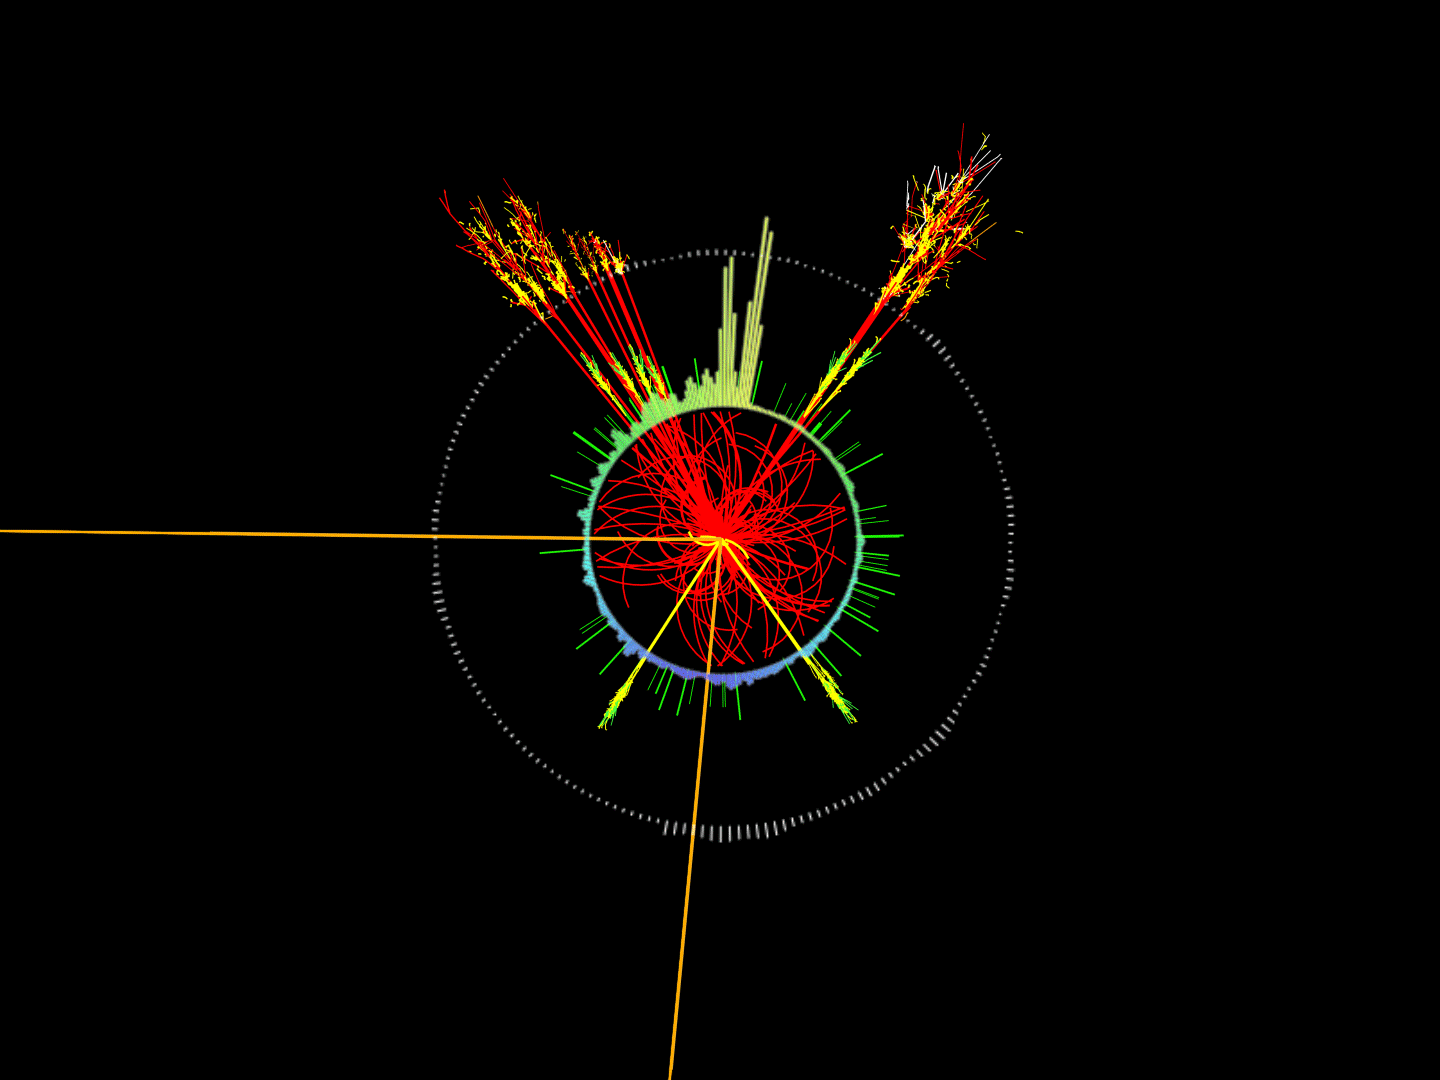 Sonified Higgs data show a surprising result